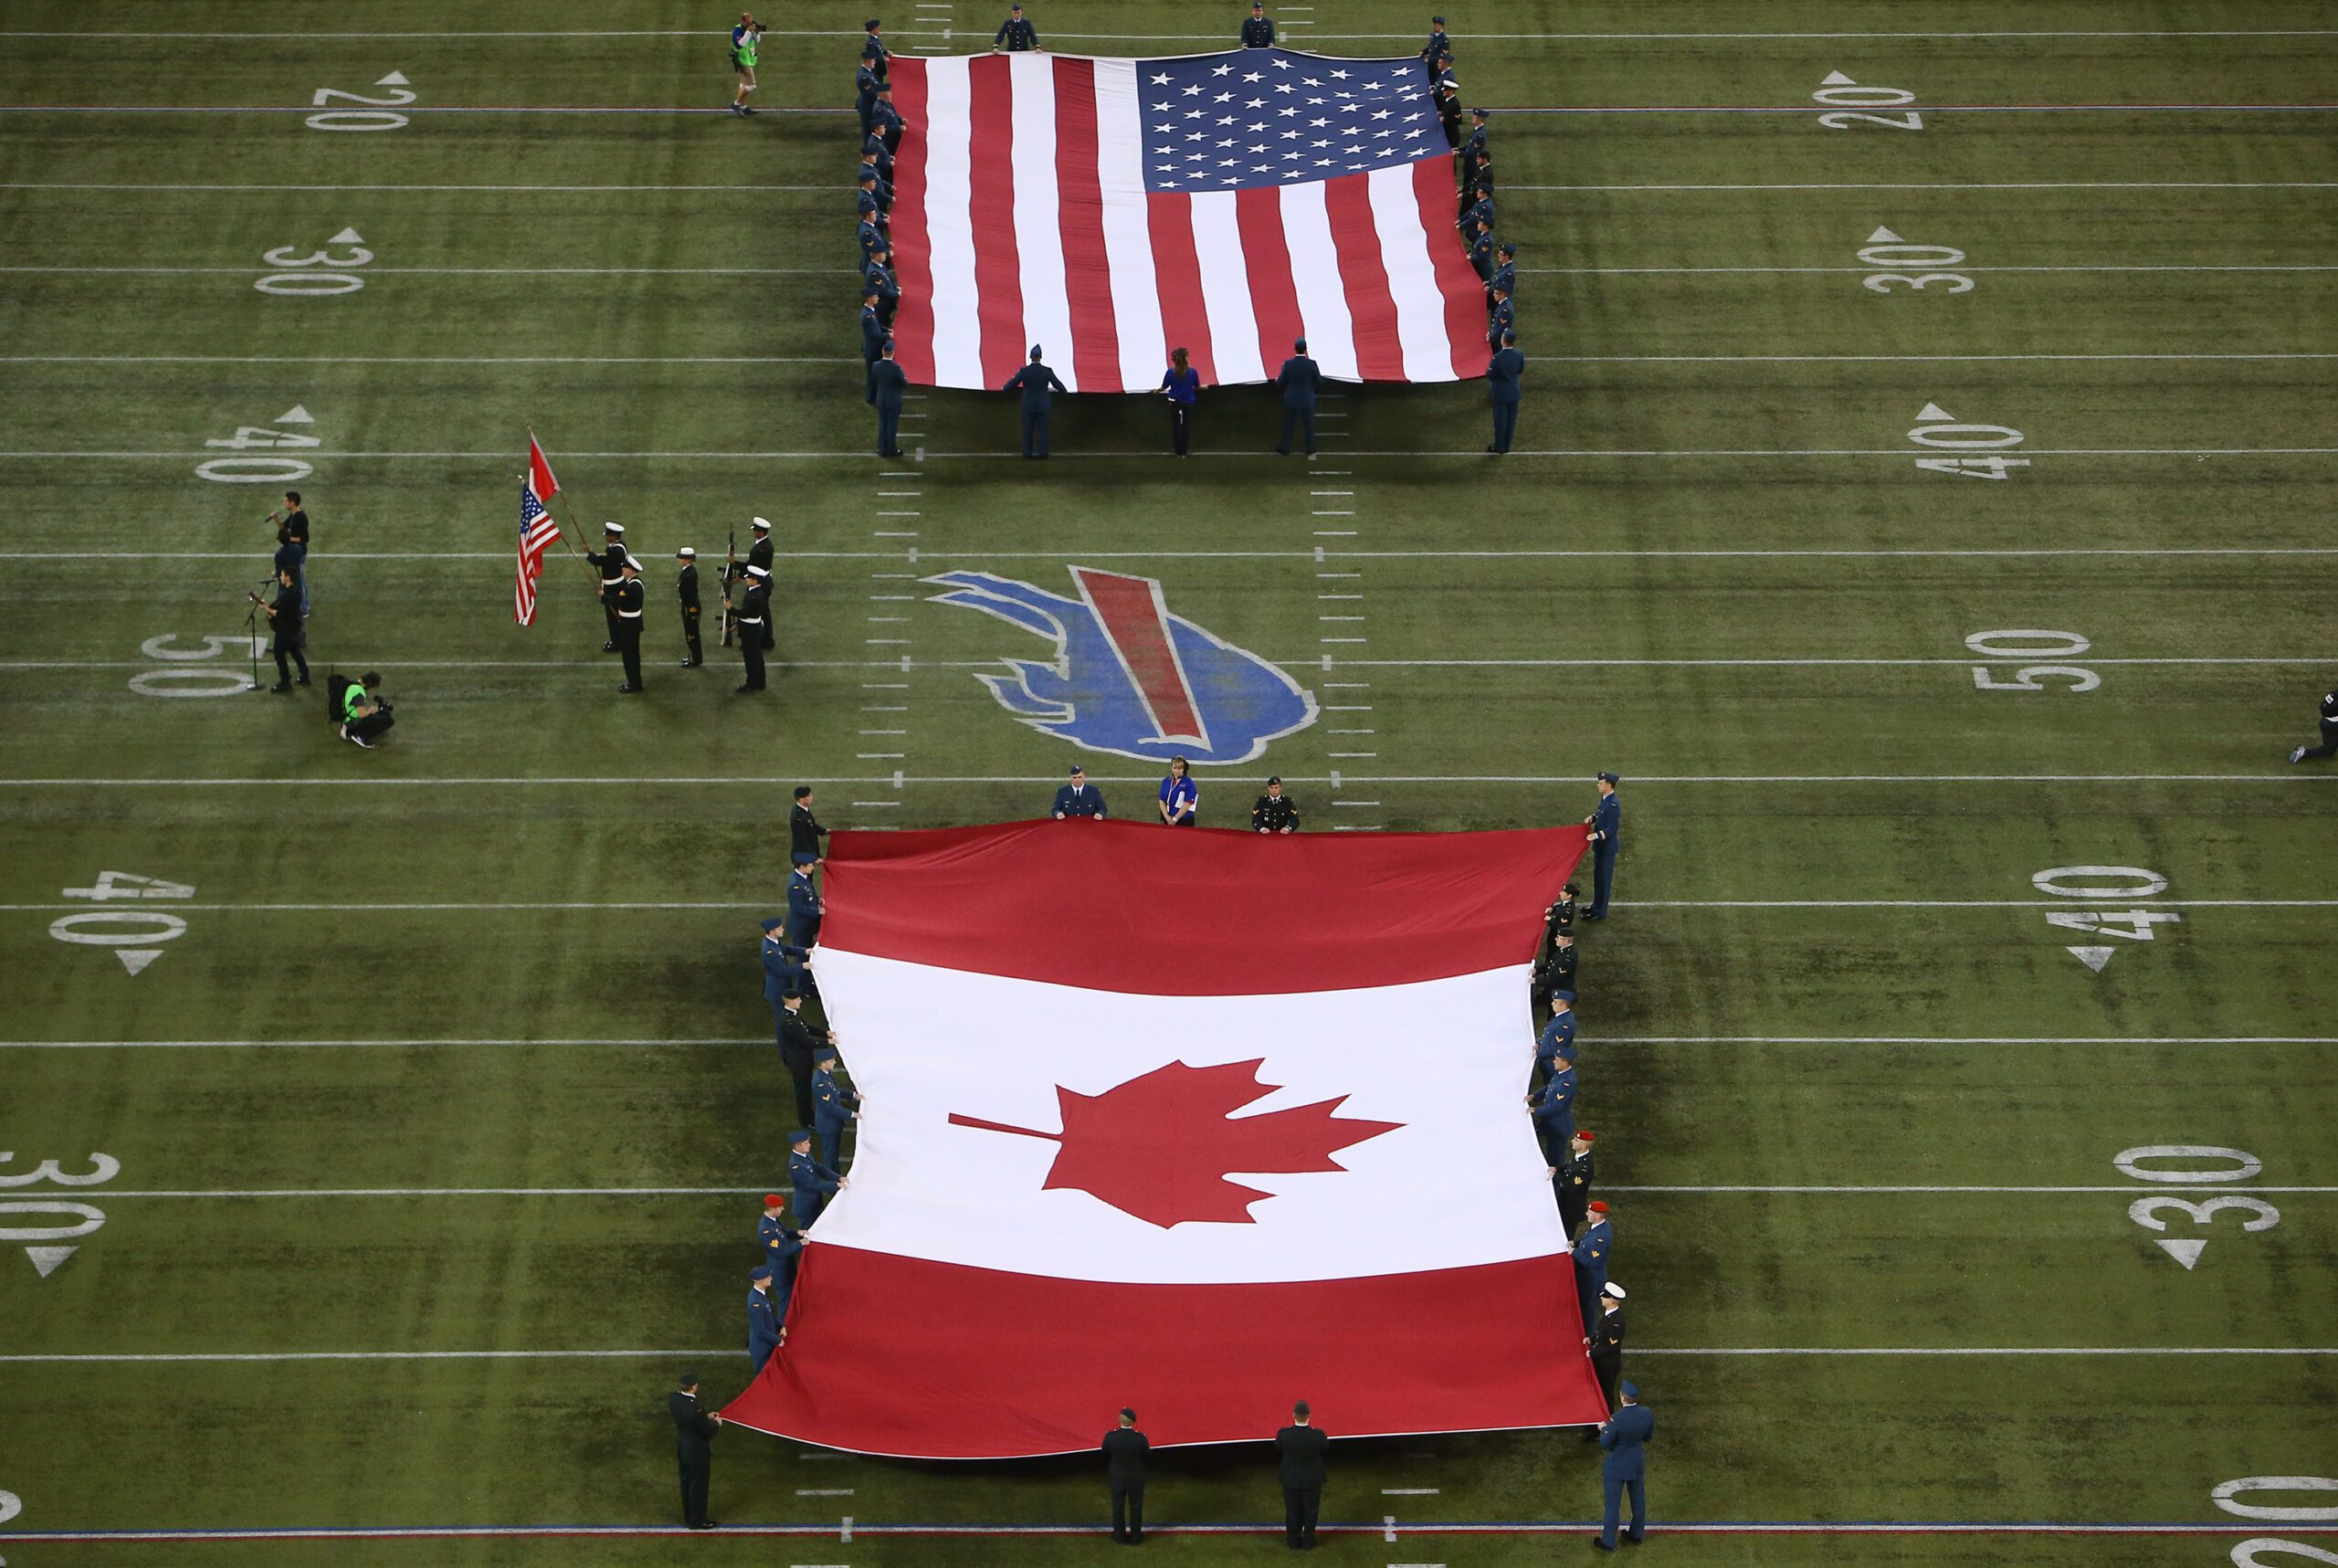 Should the NFL take their talents to Canada? I think it is time.